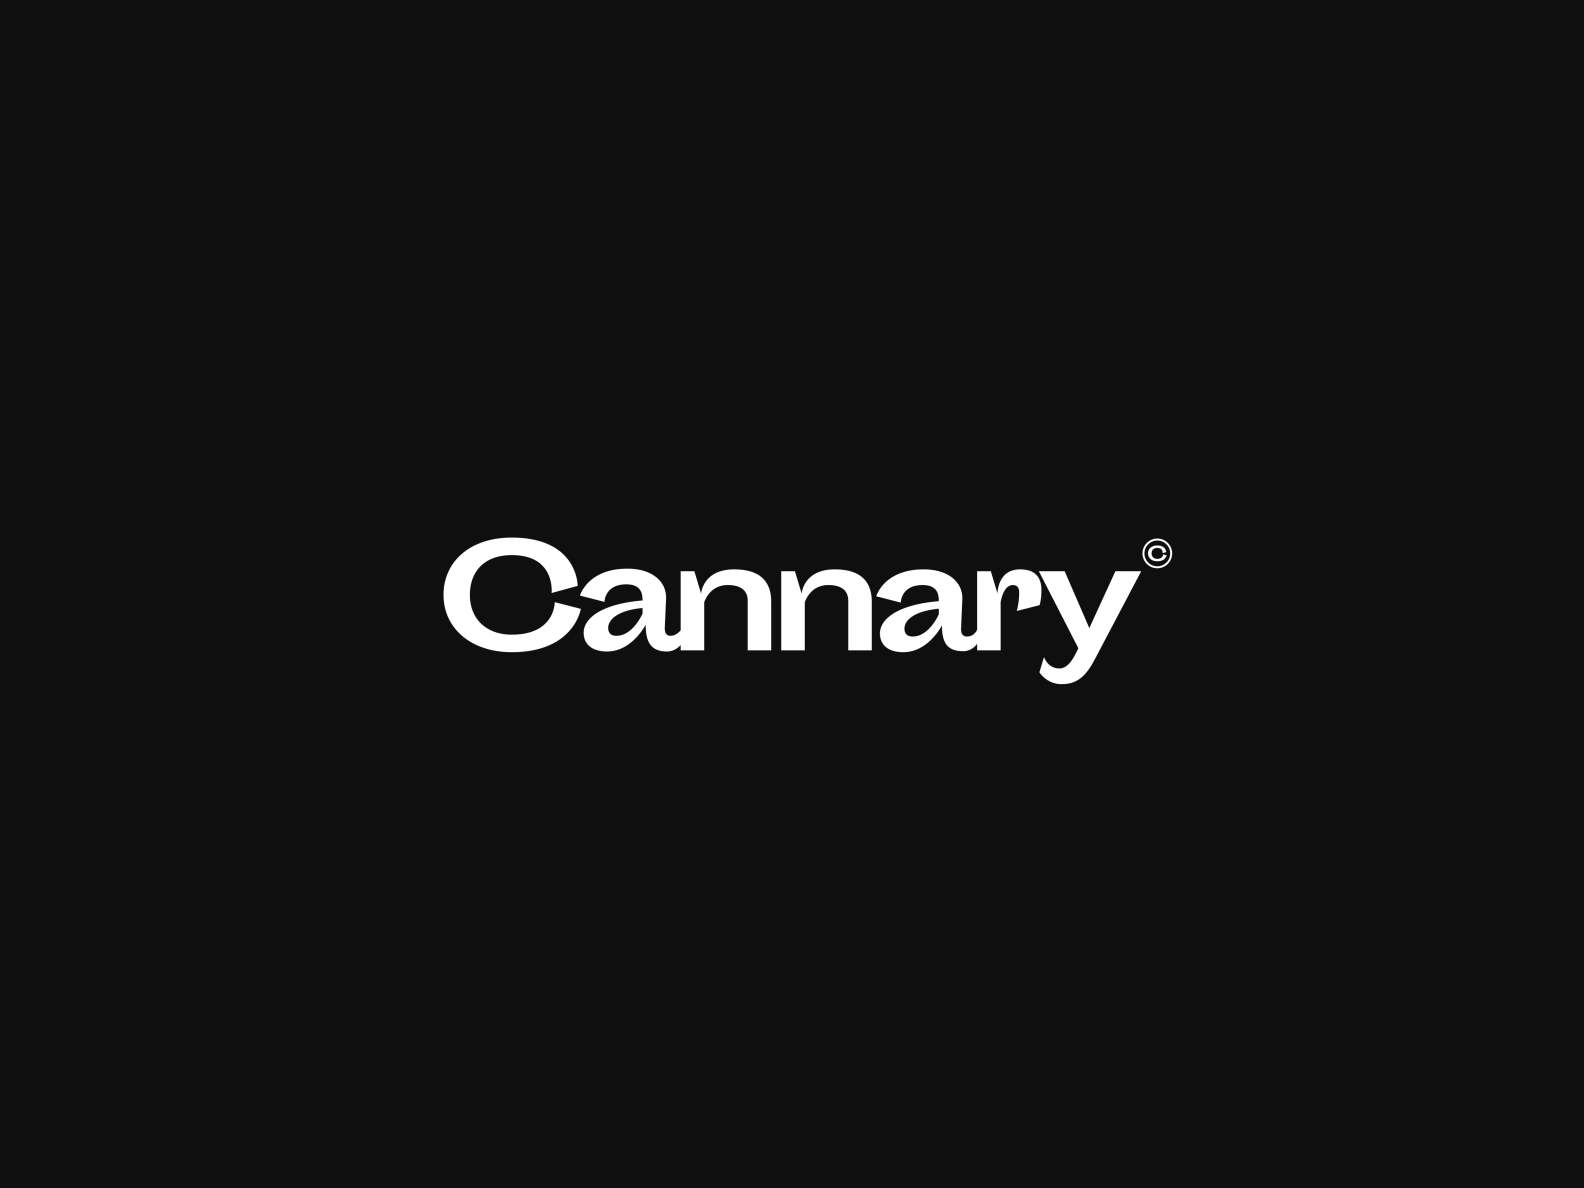 Cannary branding — Logo by Martin Ludvik on Dribbble